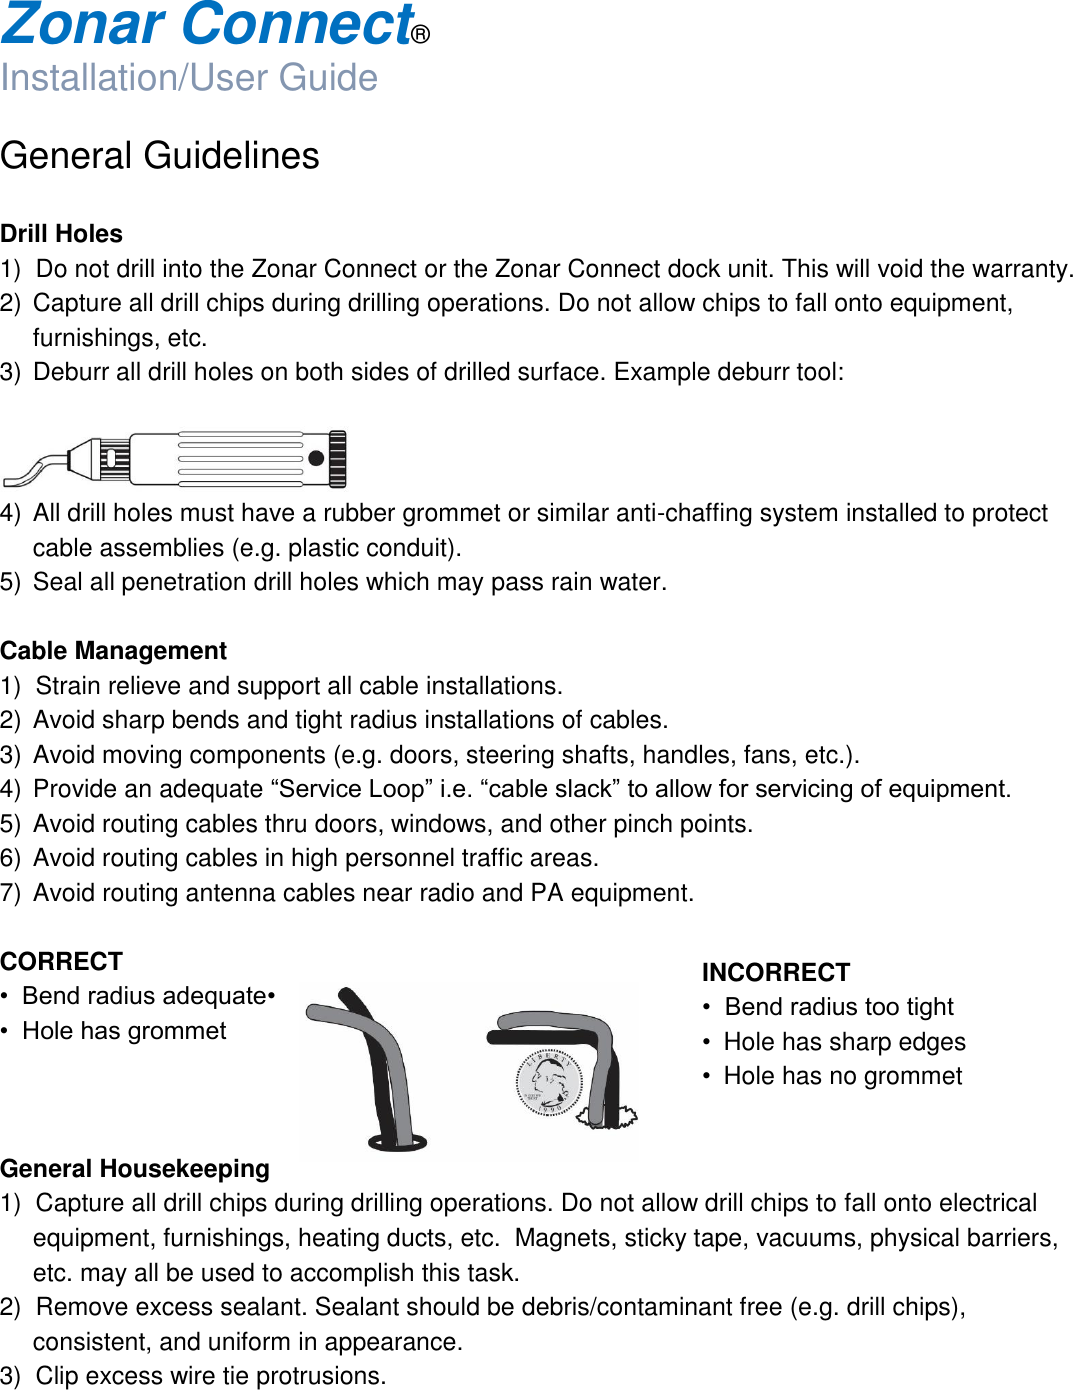  Zonar Connect®  Installation/User Guide  General Guidelines  Drill Holes 1)  Do not drill into the Zonar Connect or the Zonar Connect dock unit. This will void the warranty. 2)  Capture all drill chips during drilling operations. Do not allow chips to fall onto equipment, furnishings, etc. 3)  Deburr all drill holes on both sides of drilled surface. Example deburr tool:     4)  All drill holes must have a rubber grommet or similar anti-chaffing system installed to protect cable assemblies (e.g. plastic conduit). 5)  Seal all penetration drill holes which may pass rain water.  Cable Management 1)  Strain relieve and support all cable installations. 2)  Avoid sharp bends and tight radius installations of cables. 3)  Avoid moving components (e.g. doors, steering shafts, handles, fans, etc.). 4)  Provide an adequate “Service Loop” i.e. “cable slack” to allow for servicing of equipment. 5)  Avoid routing cables thru doors, windows, and other pinch points. 6)  Avoid routing cables in high personnel traffic areas. 7)  Avoid routing antenna cables near radio and PA equipment.  CORRECT •  Bend radius adequate•  •  Hole has grommet     General Housekeeping 1)  Capture all drill chips during drilling operations. Do not allow drill chips to fall onto electrical equipment, furnishings, heating ducts, etc.  Magnets, sticky tape, vacuums, physical barriers, etc. may all be used to accomplish this task. 2)  Remove excess sealant. Sealant should be debris/contaminant free (e.g. drill chips), consistent, and uniform in appearance. 3)  Clip excess wire tie protrusions. INCORRECT •  Bend radius too tight •  Hole has sharp edges •  Hole has no grommet  